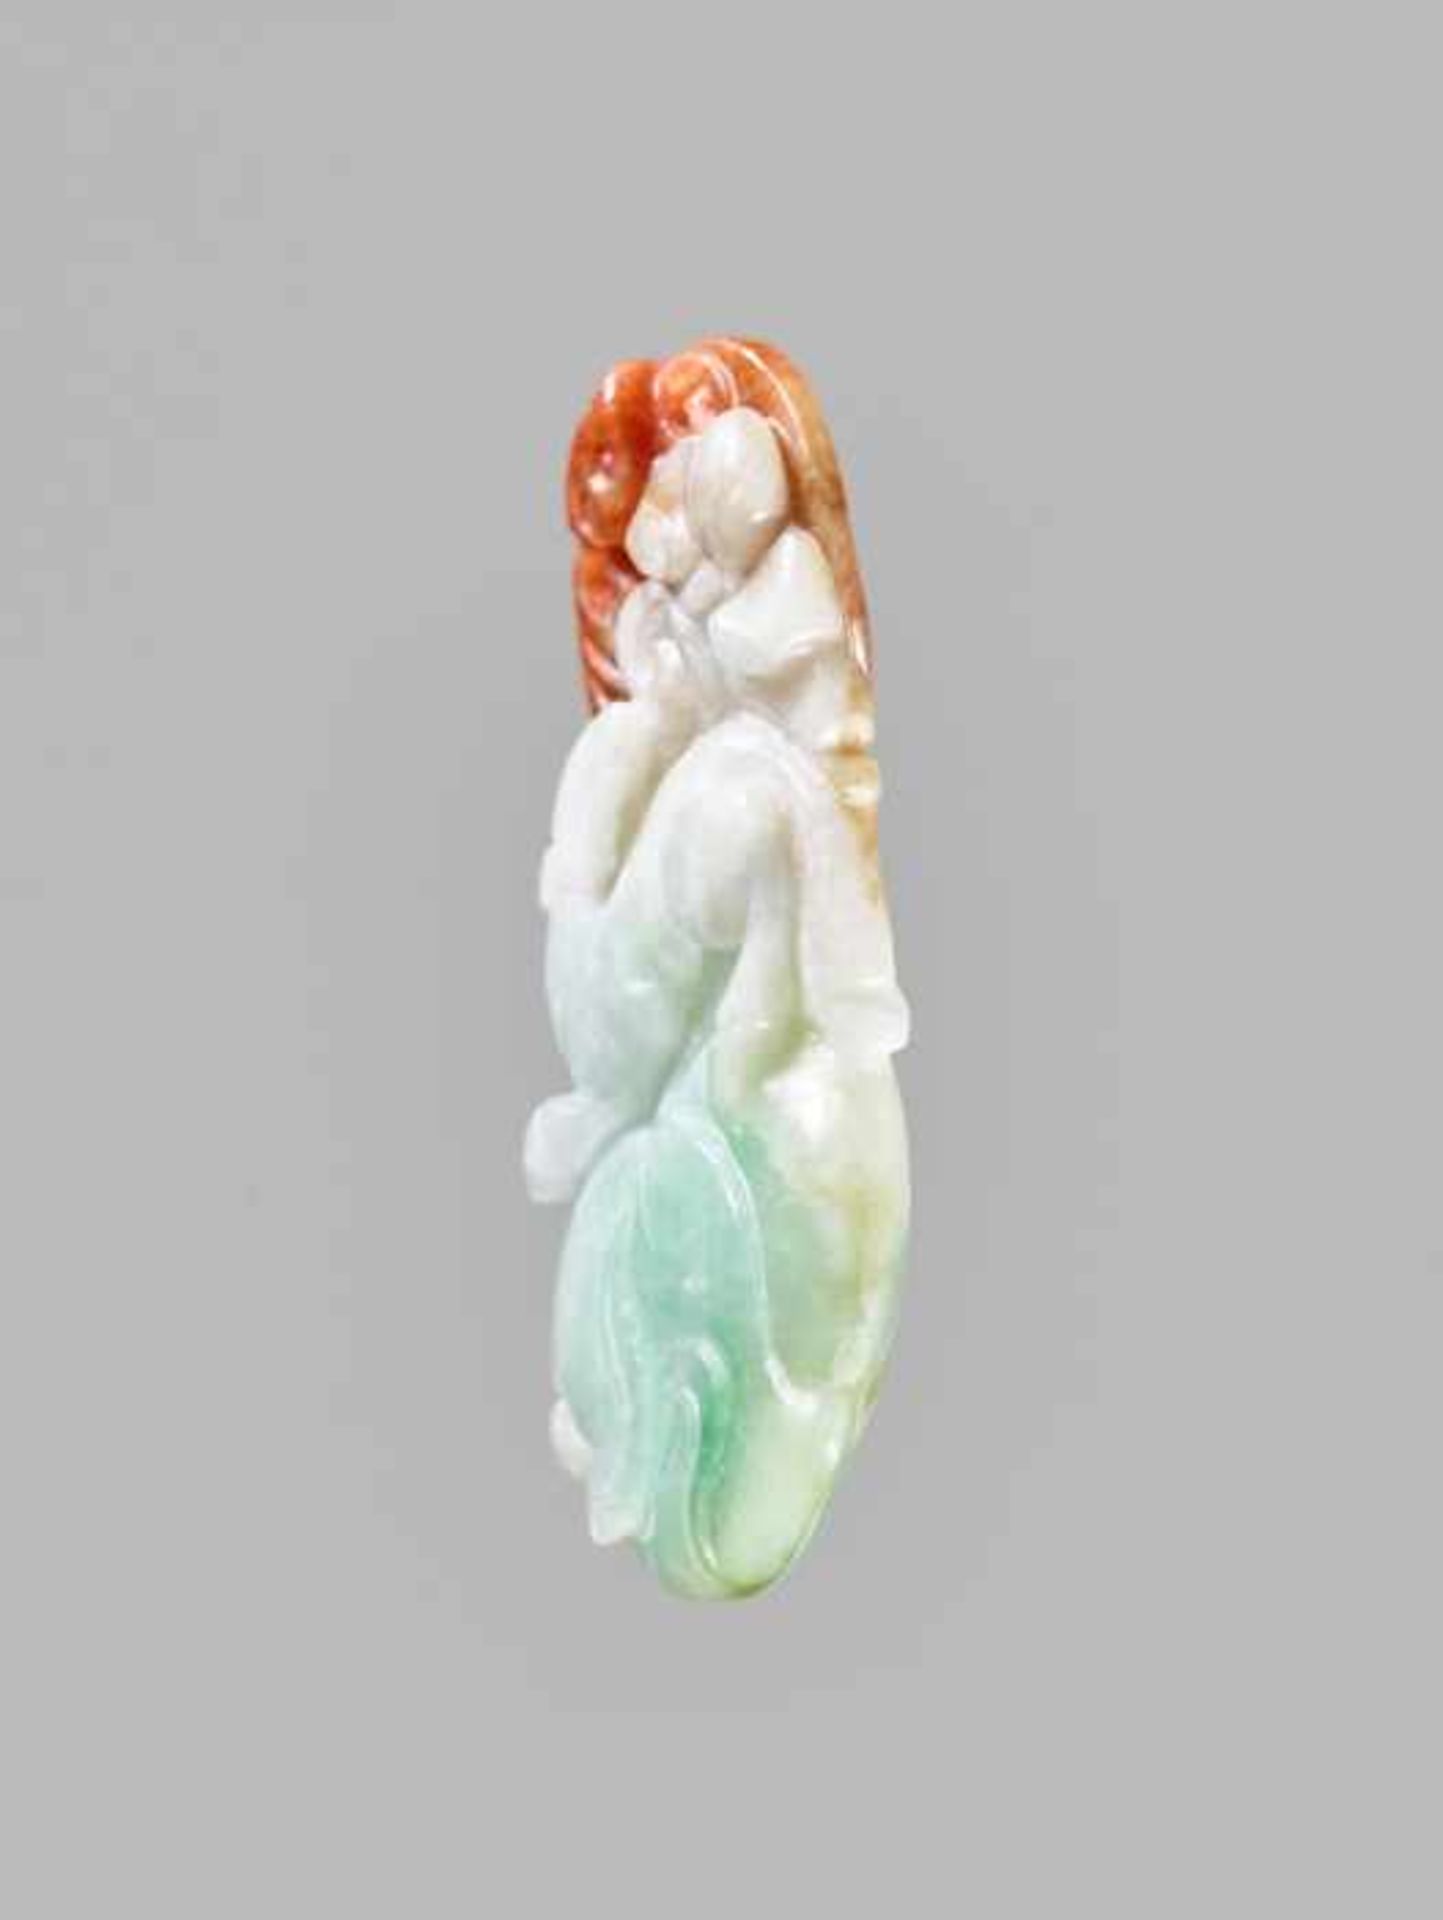 A JADEITE “BAT AND PEACH” PENDANT Light green jadeite with areas of white and russet, cleverly - Image 3 of 4